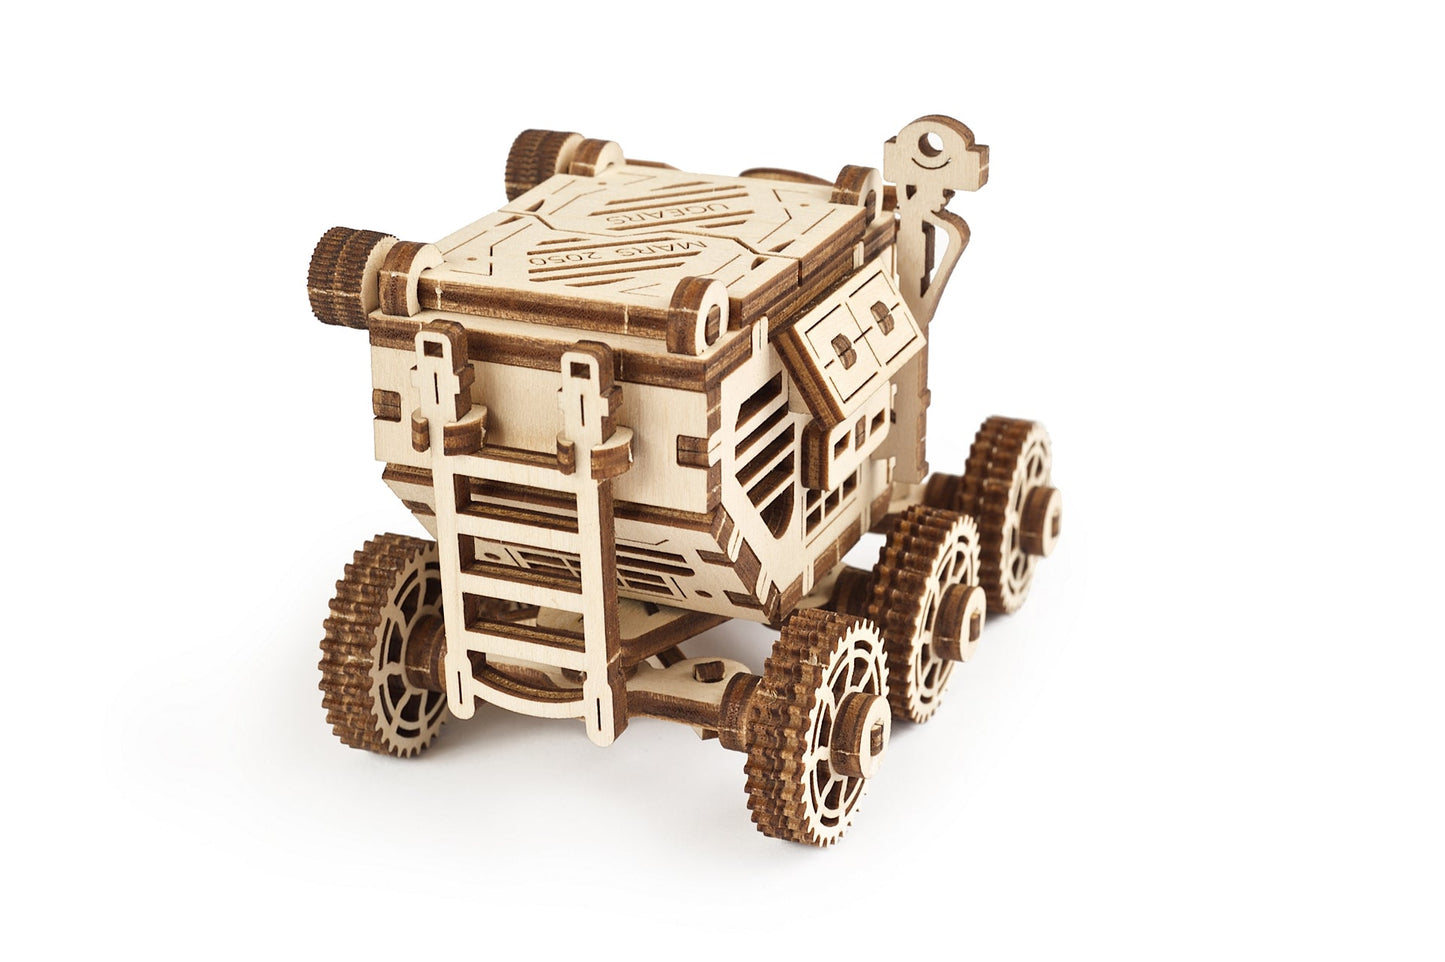 Ugears Mars Buggy / Mars Rover ★Mechanical 3D Puzzle Kit Model Toys Gift Present Birthday Xmas Christmas Kids Adults